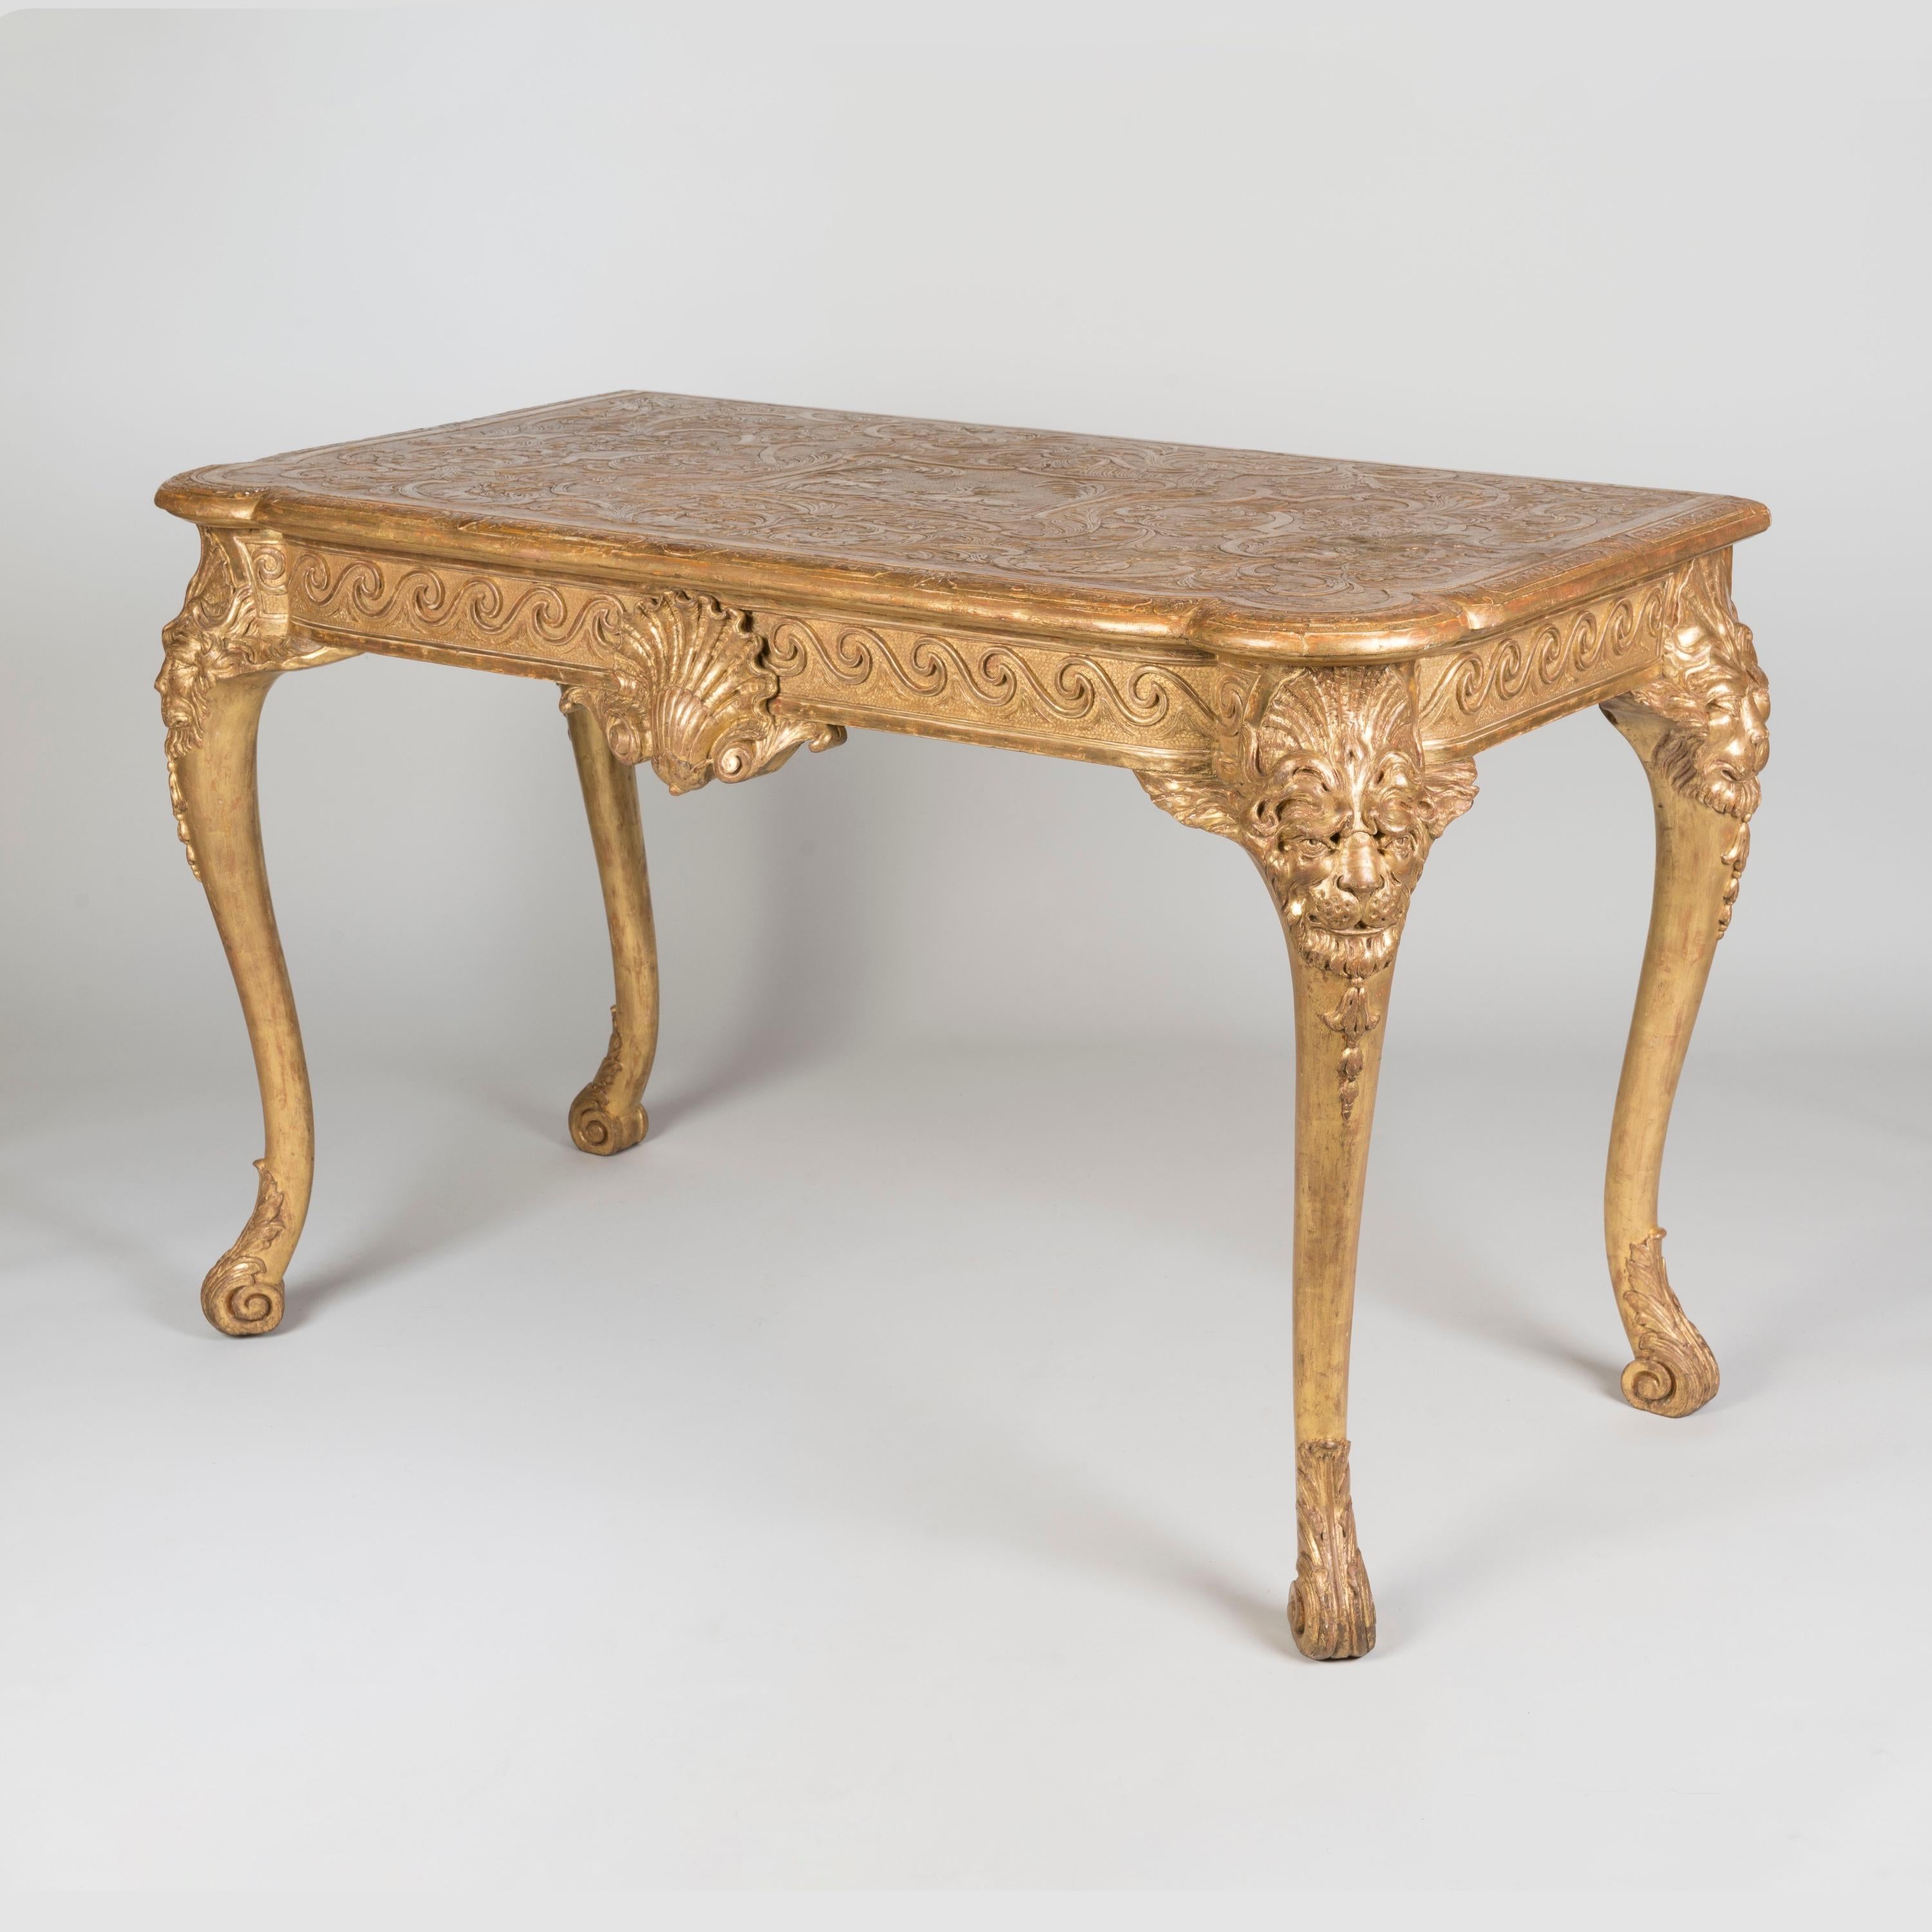 19th Century English Gilt Gesso Console Table in the Early Georgian Style For Sale 1